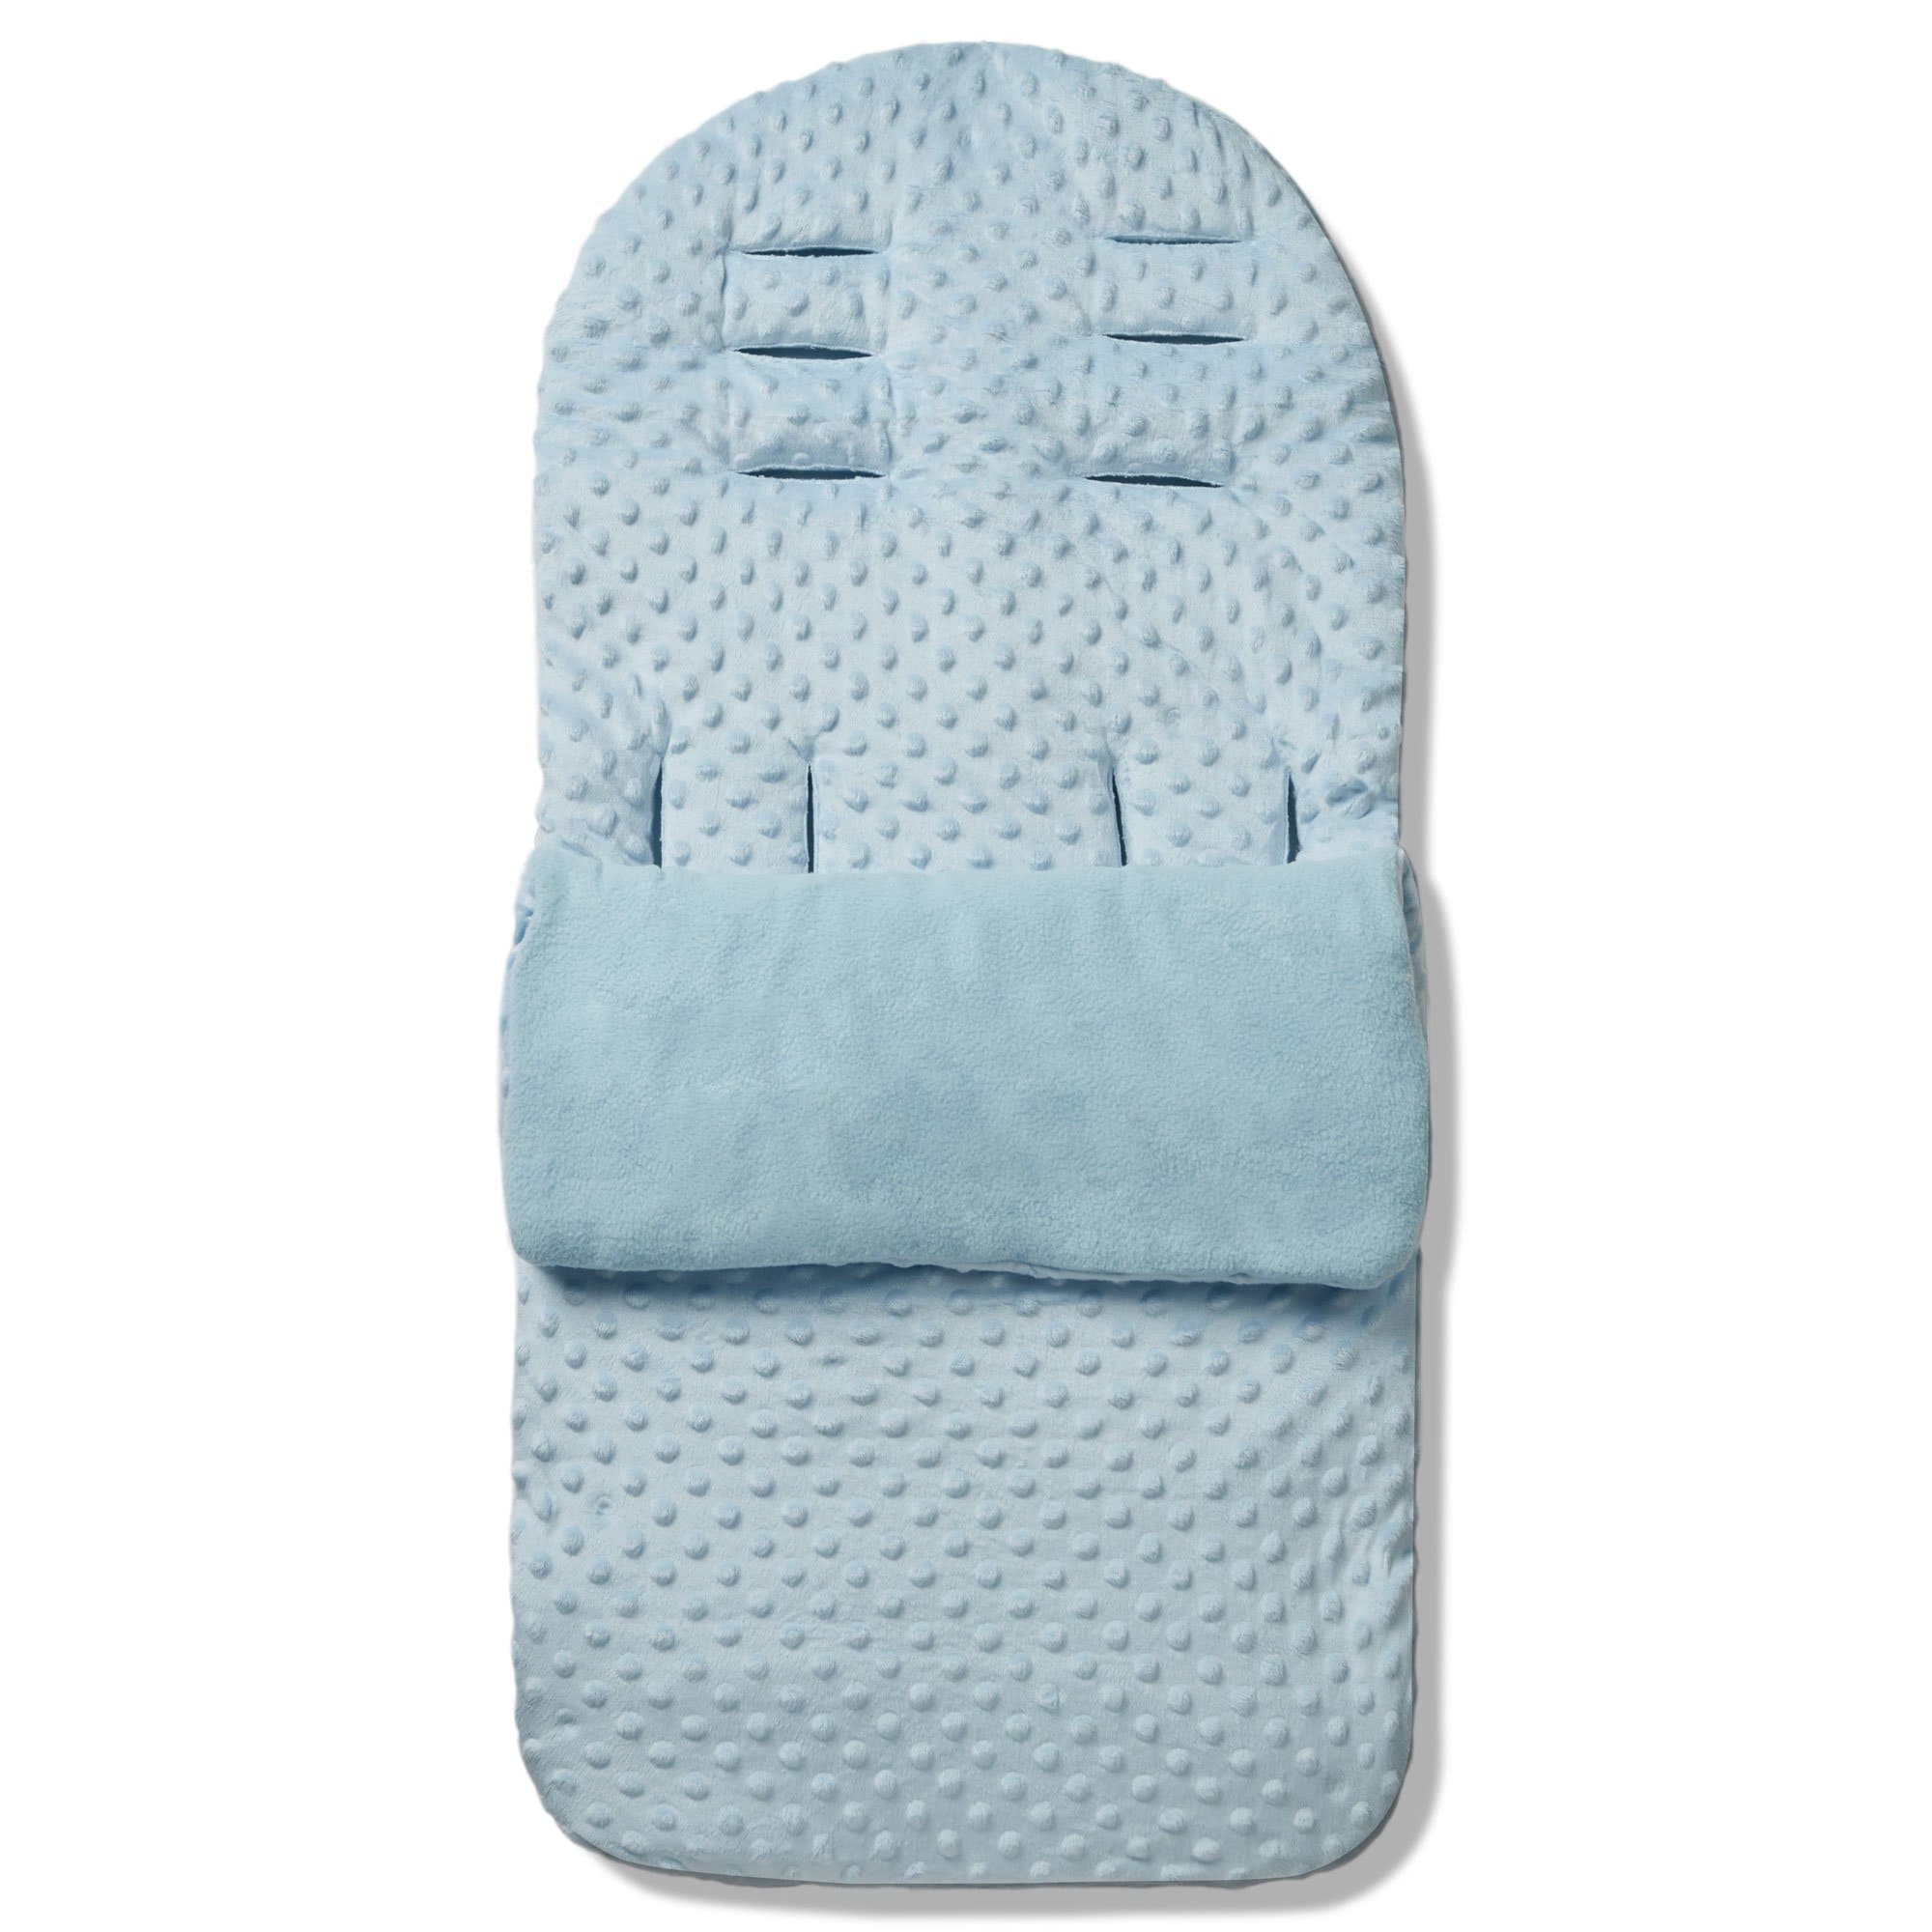 Dimple Footmuff / Cosy Toes Compatible with Nuna - Blue / Fits All Models | For Your Little One